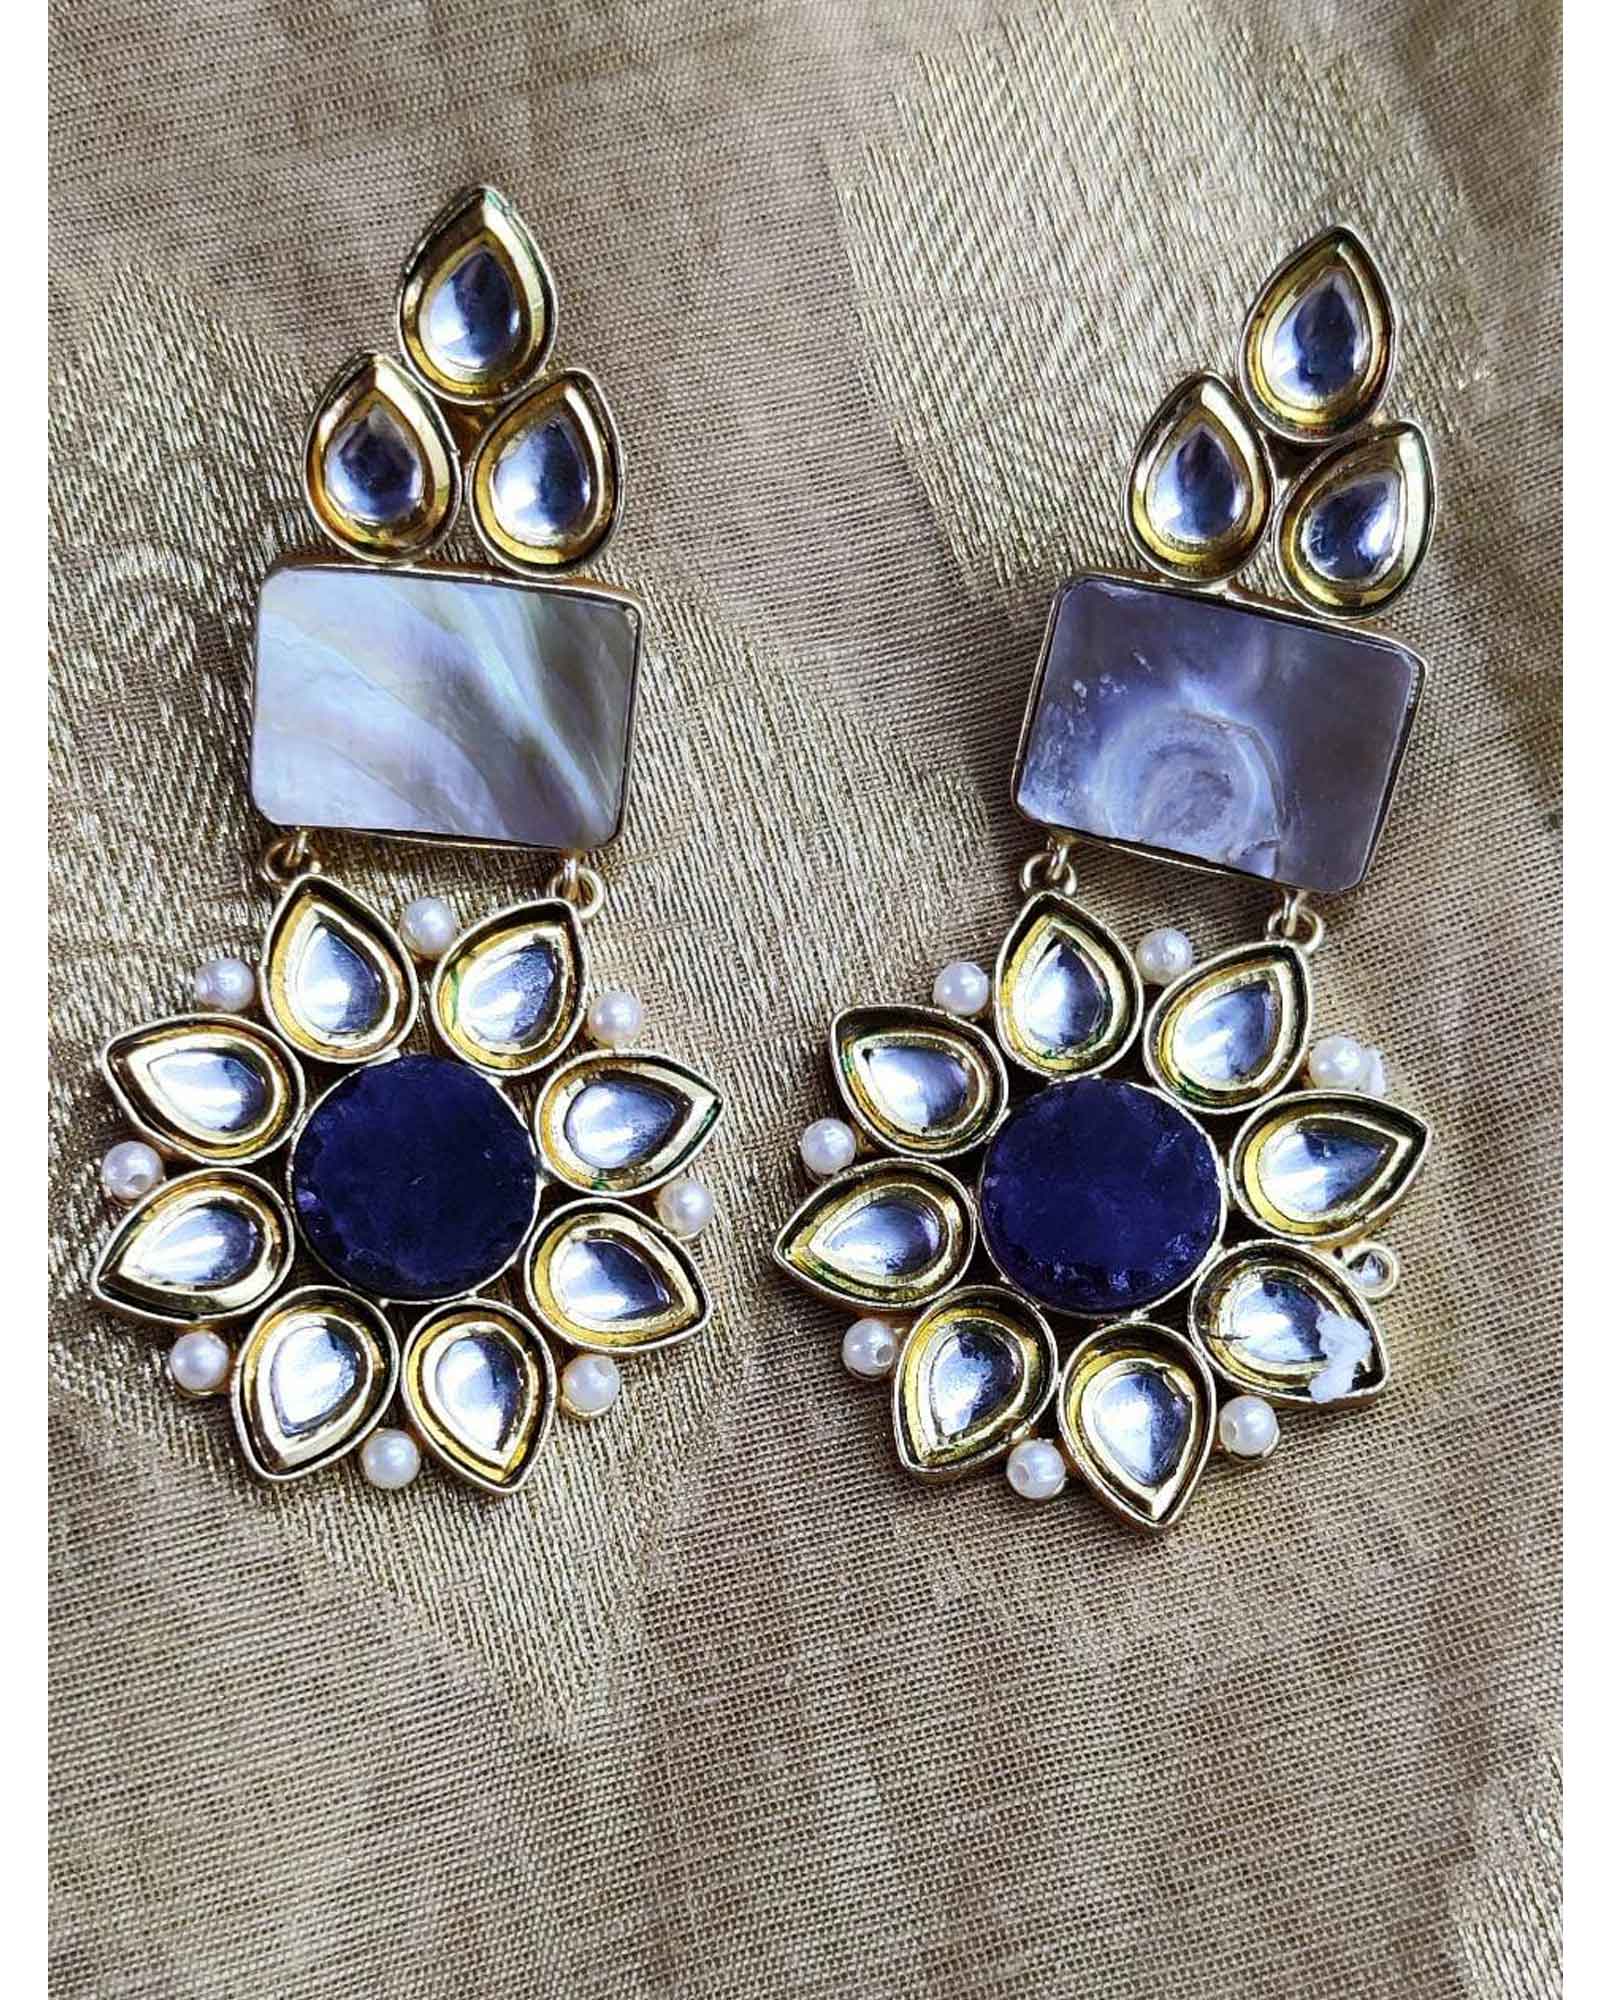 Aggregate more than 64 fabindia earrings online sale best